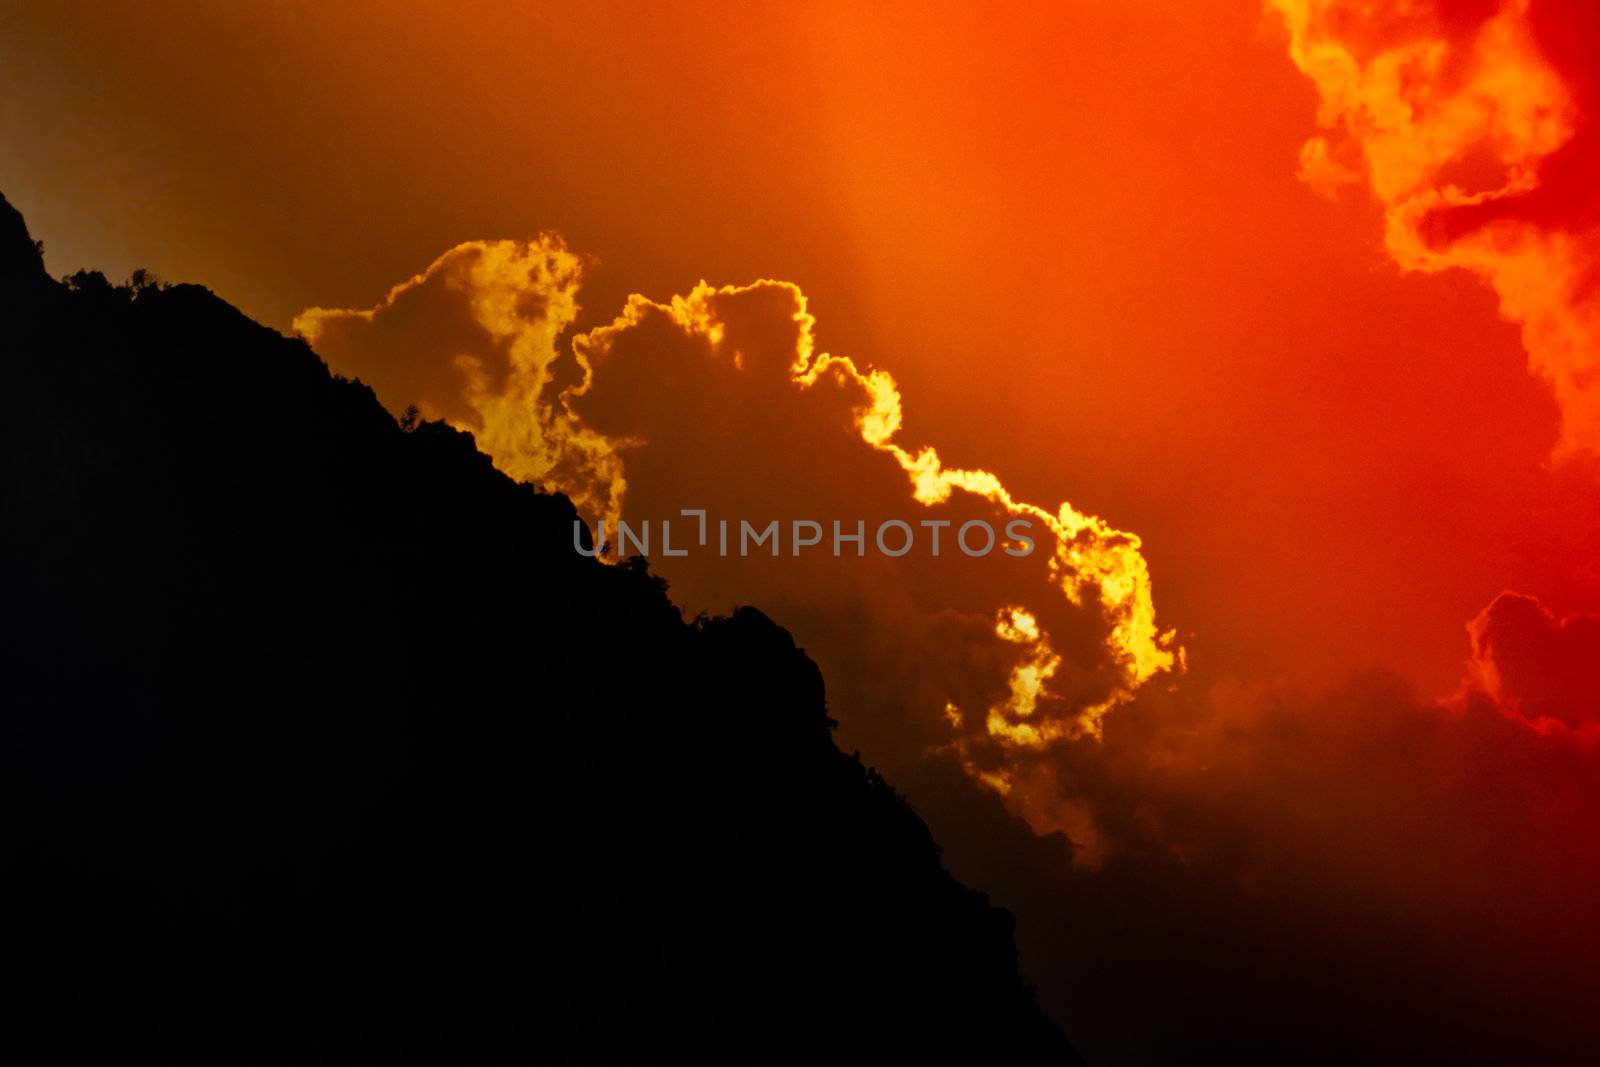 Rugged mountain silhouette and dramatic sunset sky with clouds.